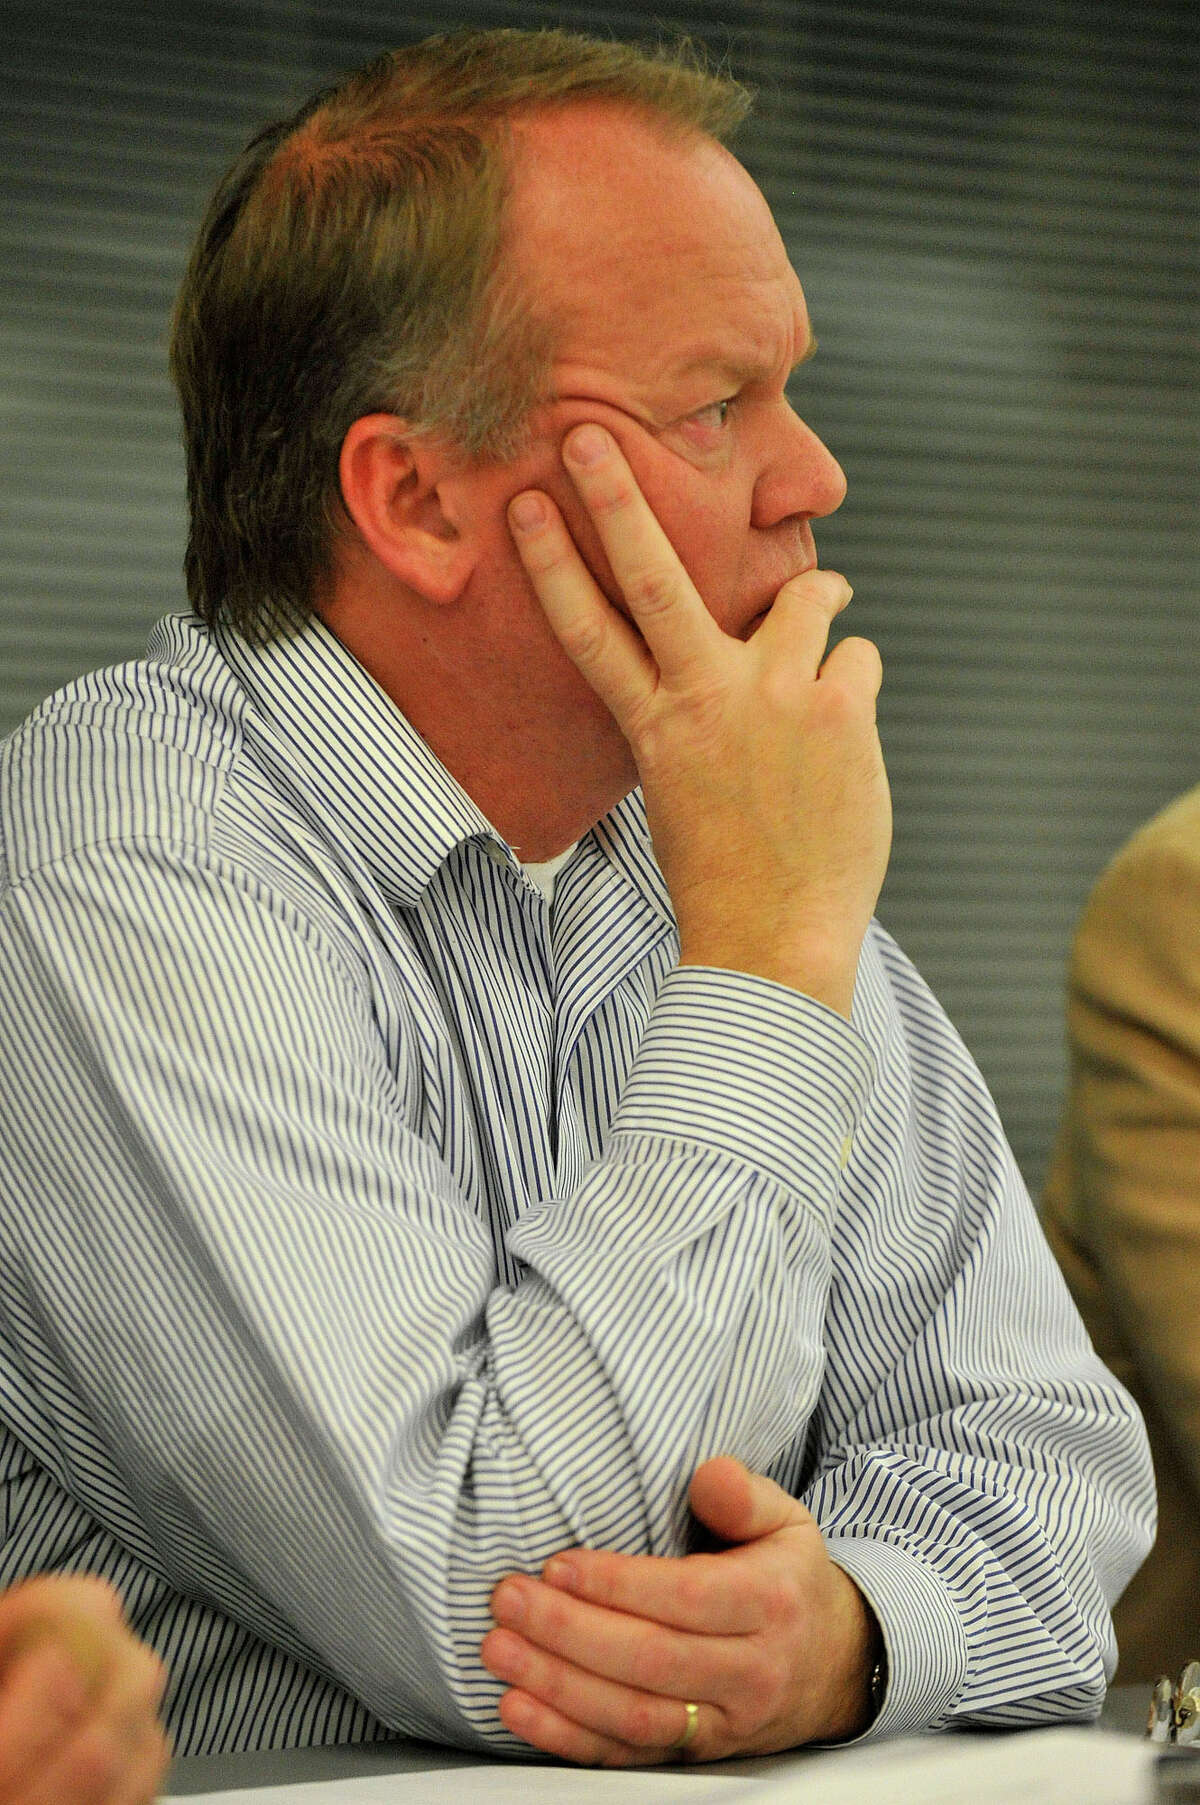 Chairman of the Zoning Board Tom Mills listens to public comments during the public hearing in front of the Zoning Board on the proposed redevelopment of the Stamford train station parking garage at the Stamford Government Center in Stamford, Conn., on Nov. 24, 2014. The state Department of Transportation picked John McClutchy to develop the current train station parking garage into a $500 million, 1 million square feet mixed-use property. Many speakers were concerned about the low number of spaces, safety and the distance commuters must travel from their parking spaces to the train platform.